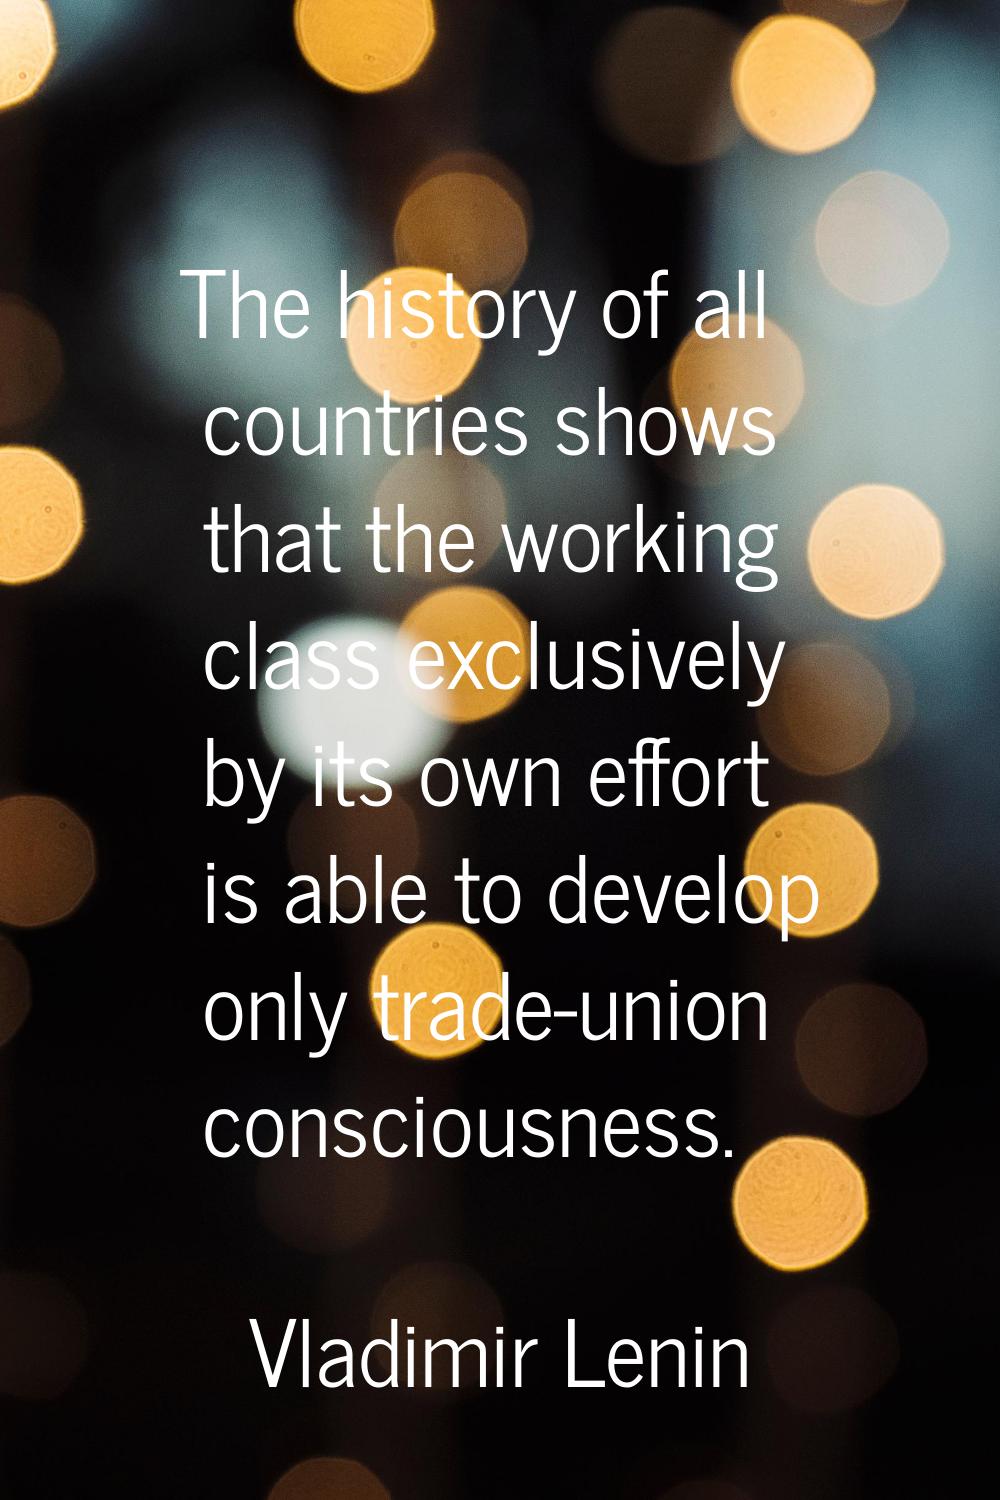 The history of all countries shows that the working class exclusively by its own effort is able to 